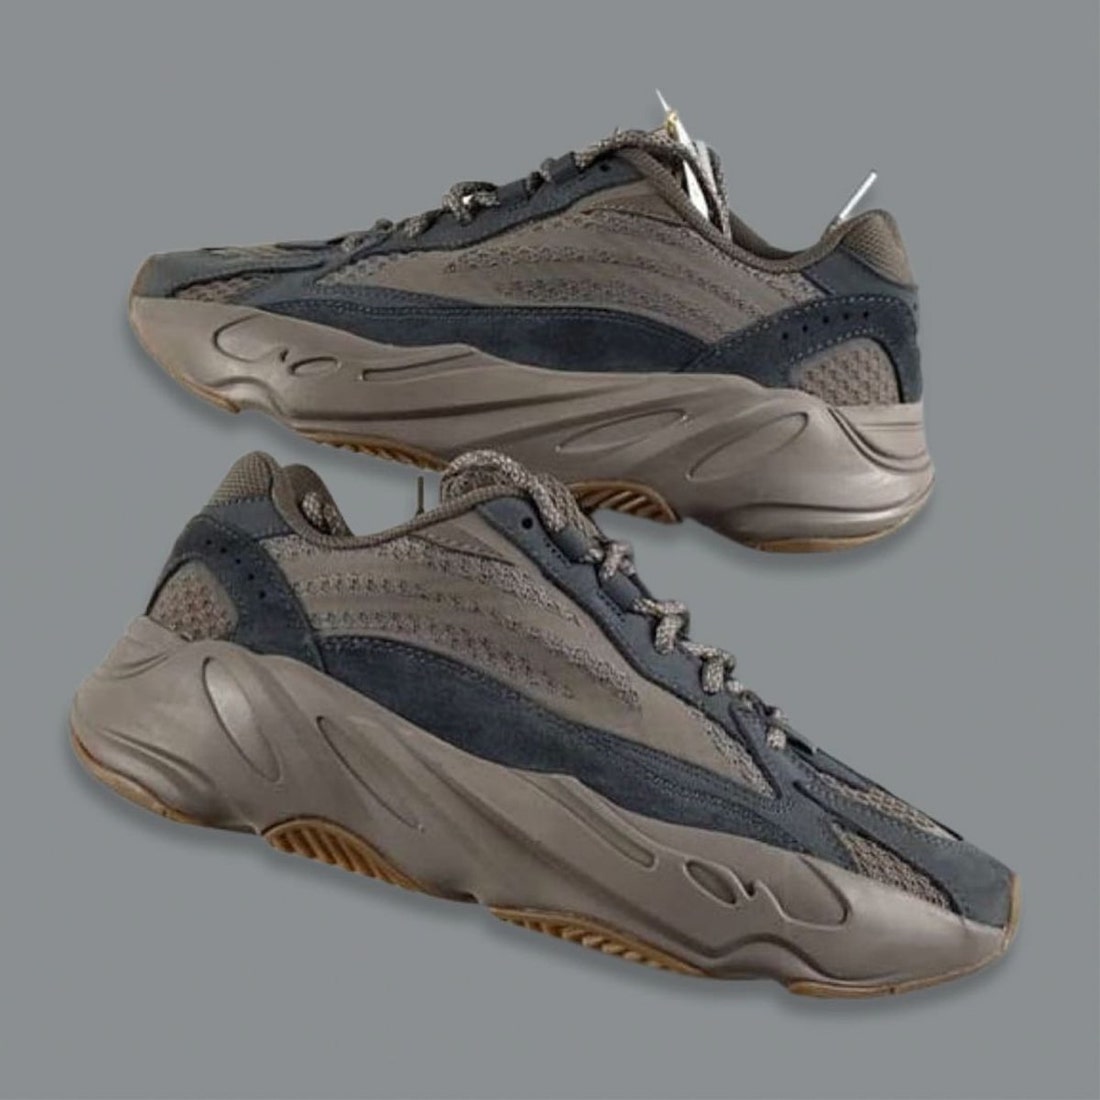 adidas Yeezy Boost 700 V2 Mauve Release Date Price 3